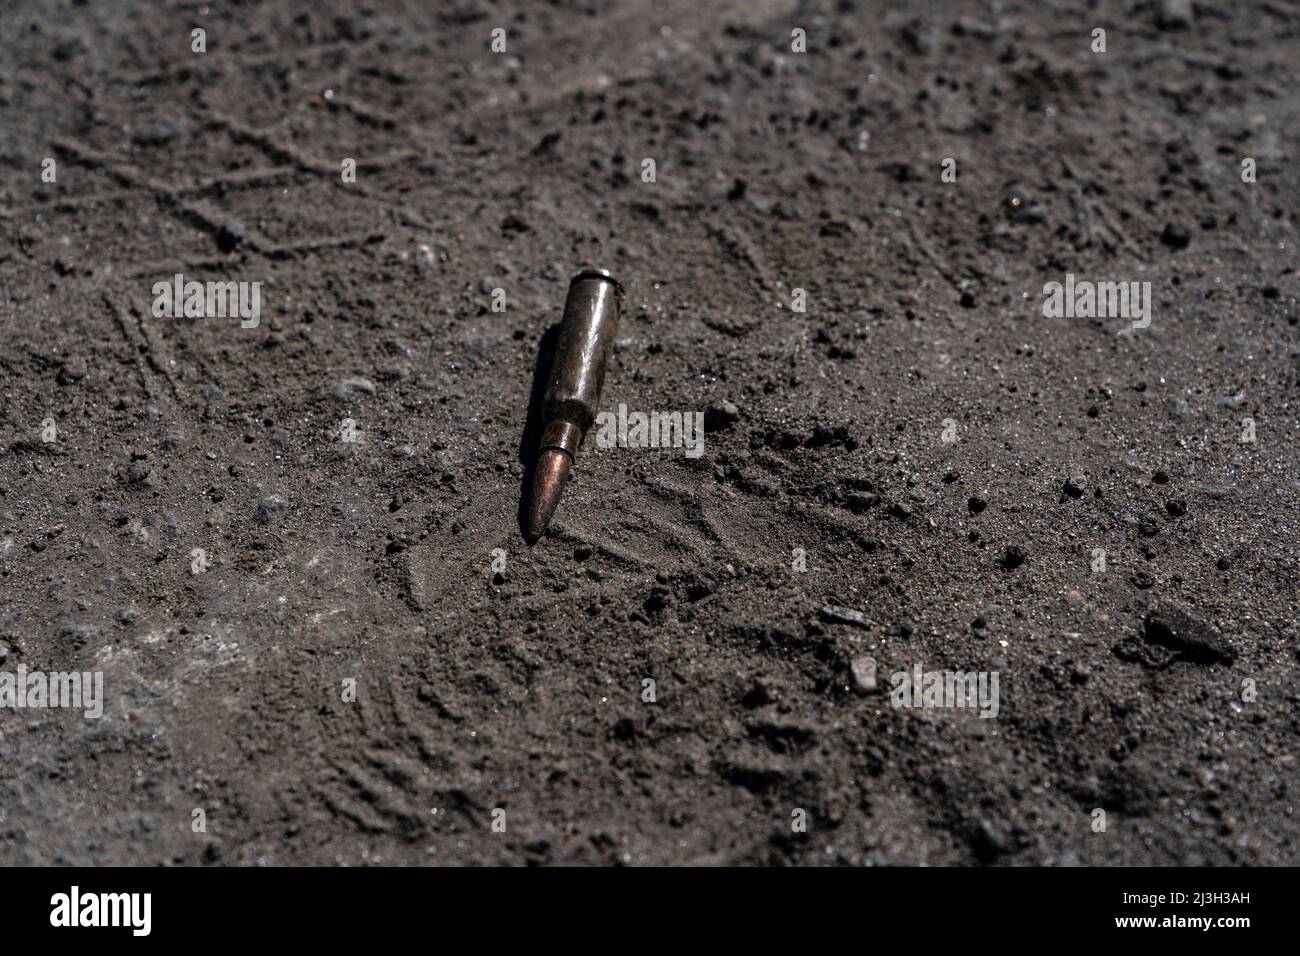 BUCHA, UKRAINE - APRIL 7, 2022 - A cartridge lies on the ground after the liberation of the city from Russian invaders, Bucha, Kyiv Region, northern U Stock Photo